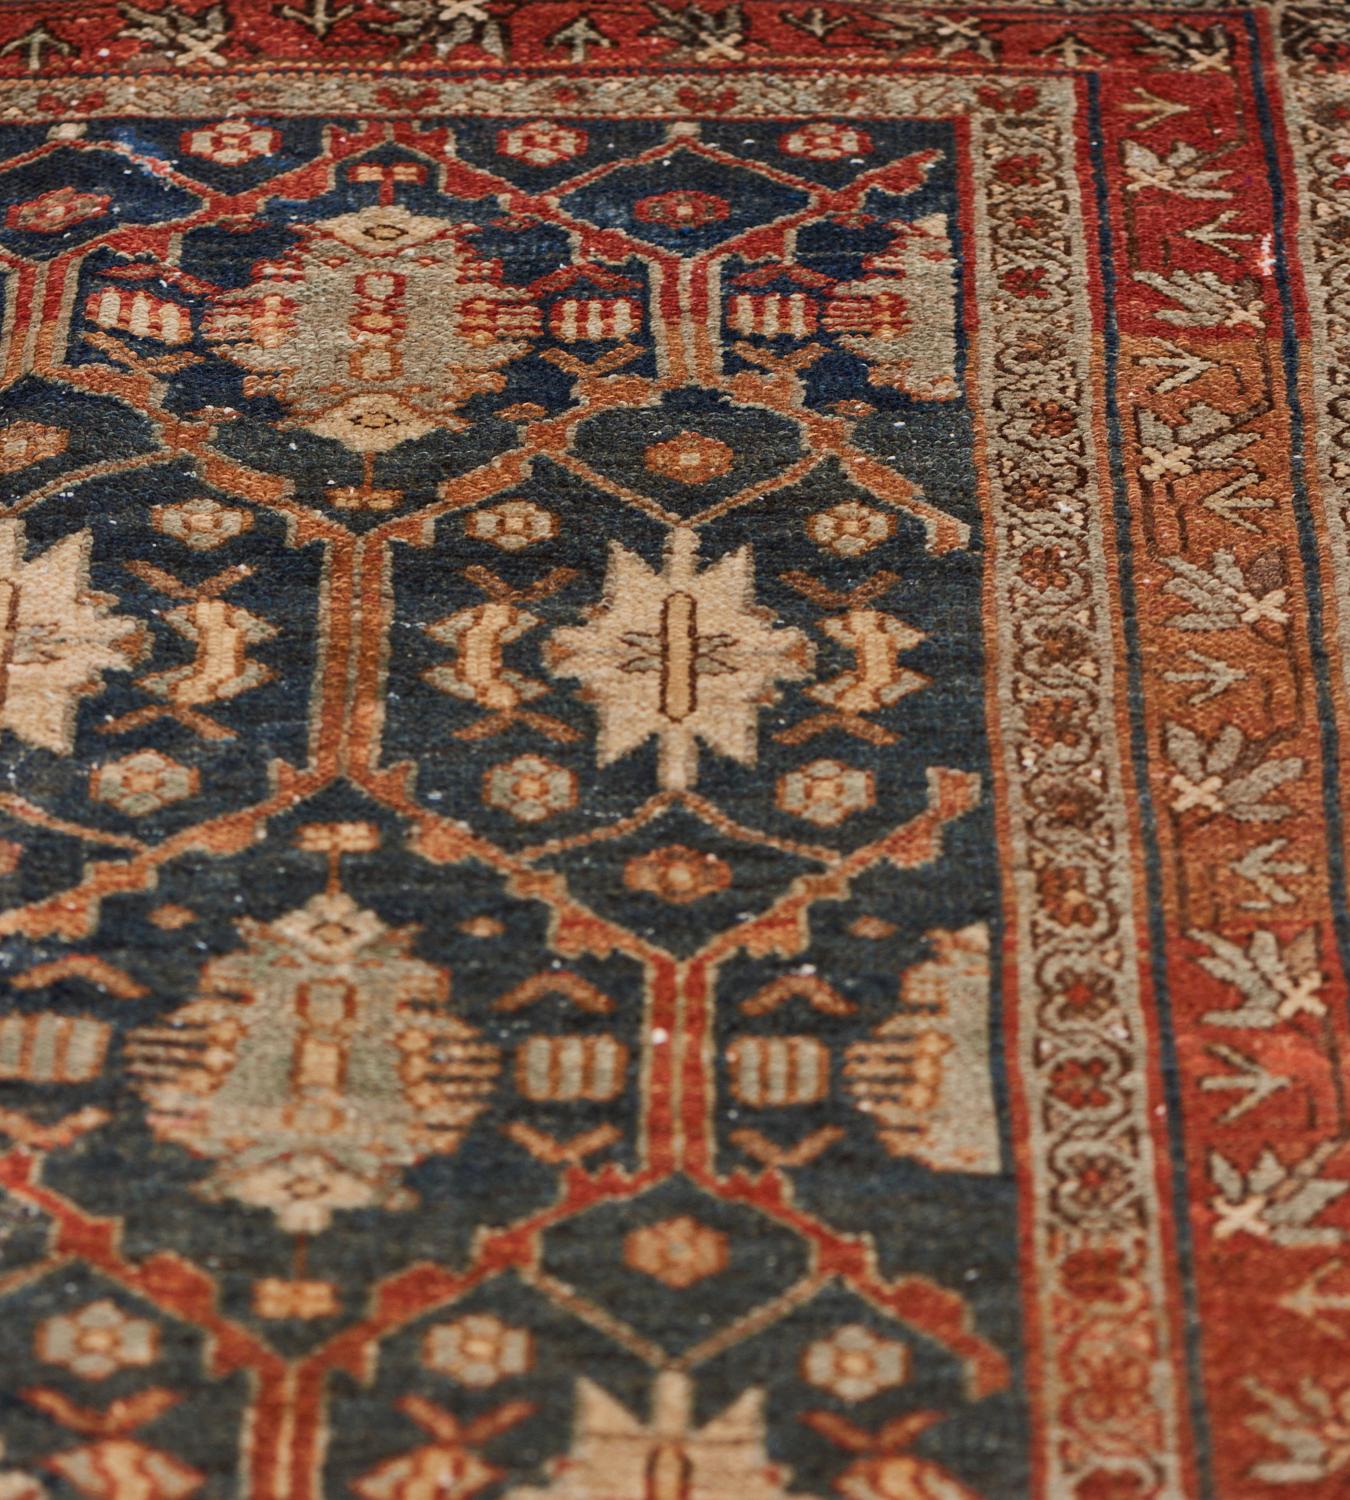 This traditional hand-woven Persian Malayer rug has a dark navy field with overall design of stepped lozenge lattice enclosing linked medallions, in a rust stripe with a polychrome floral border between linked-lozenge vine stripes.